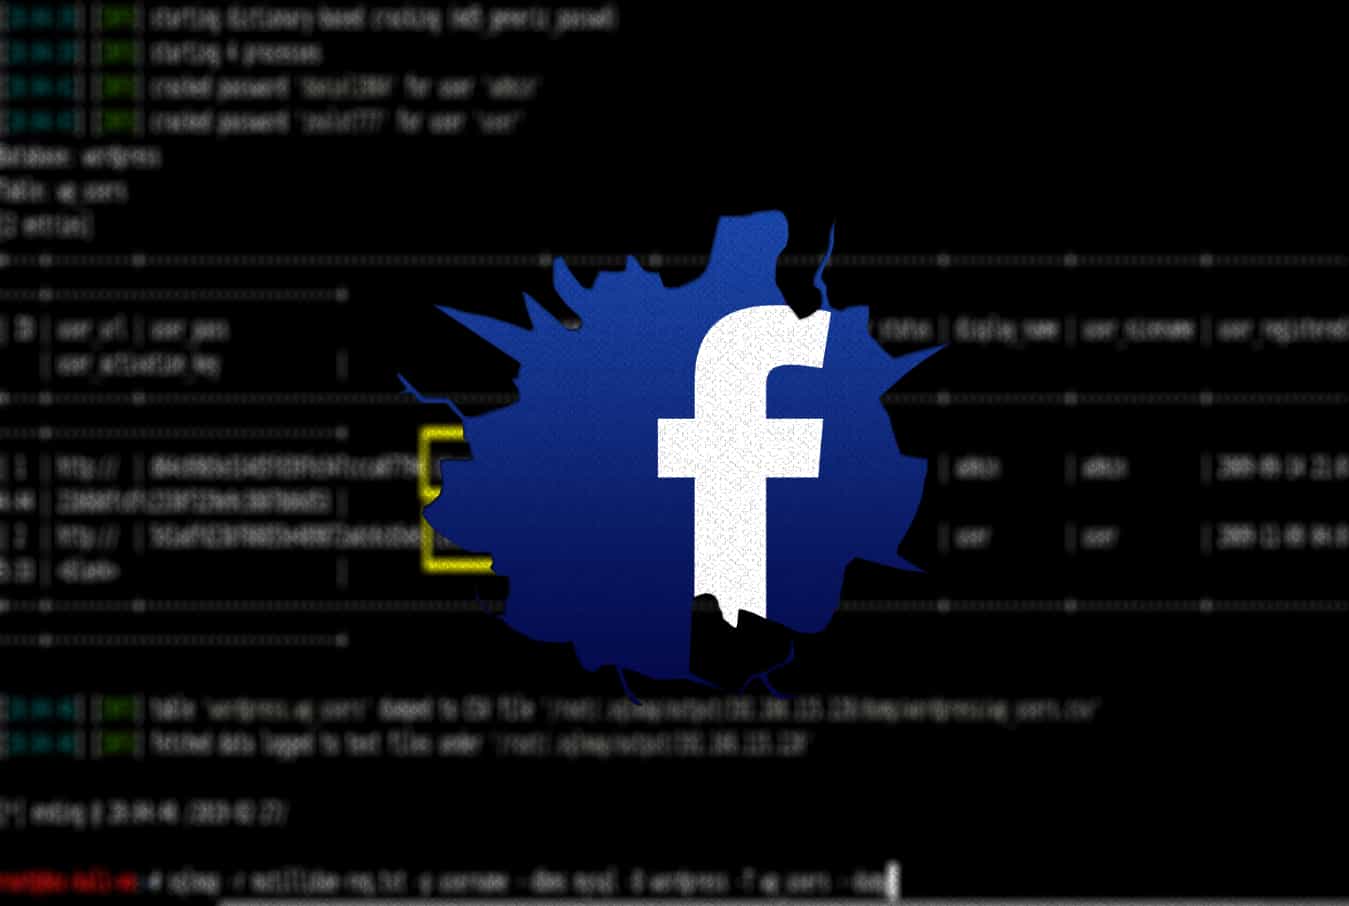 Facebook data of 500M+ users from 106 countries leaked online